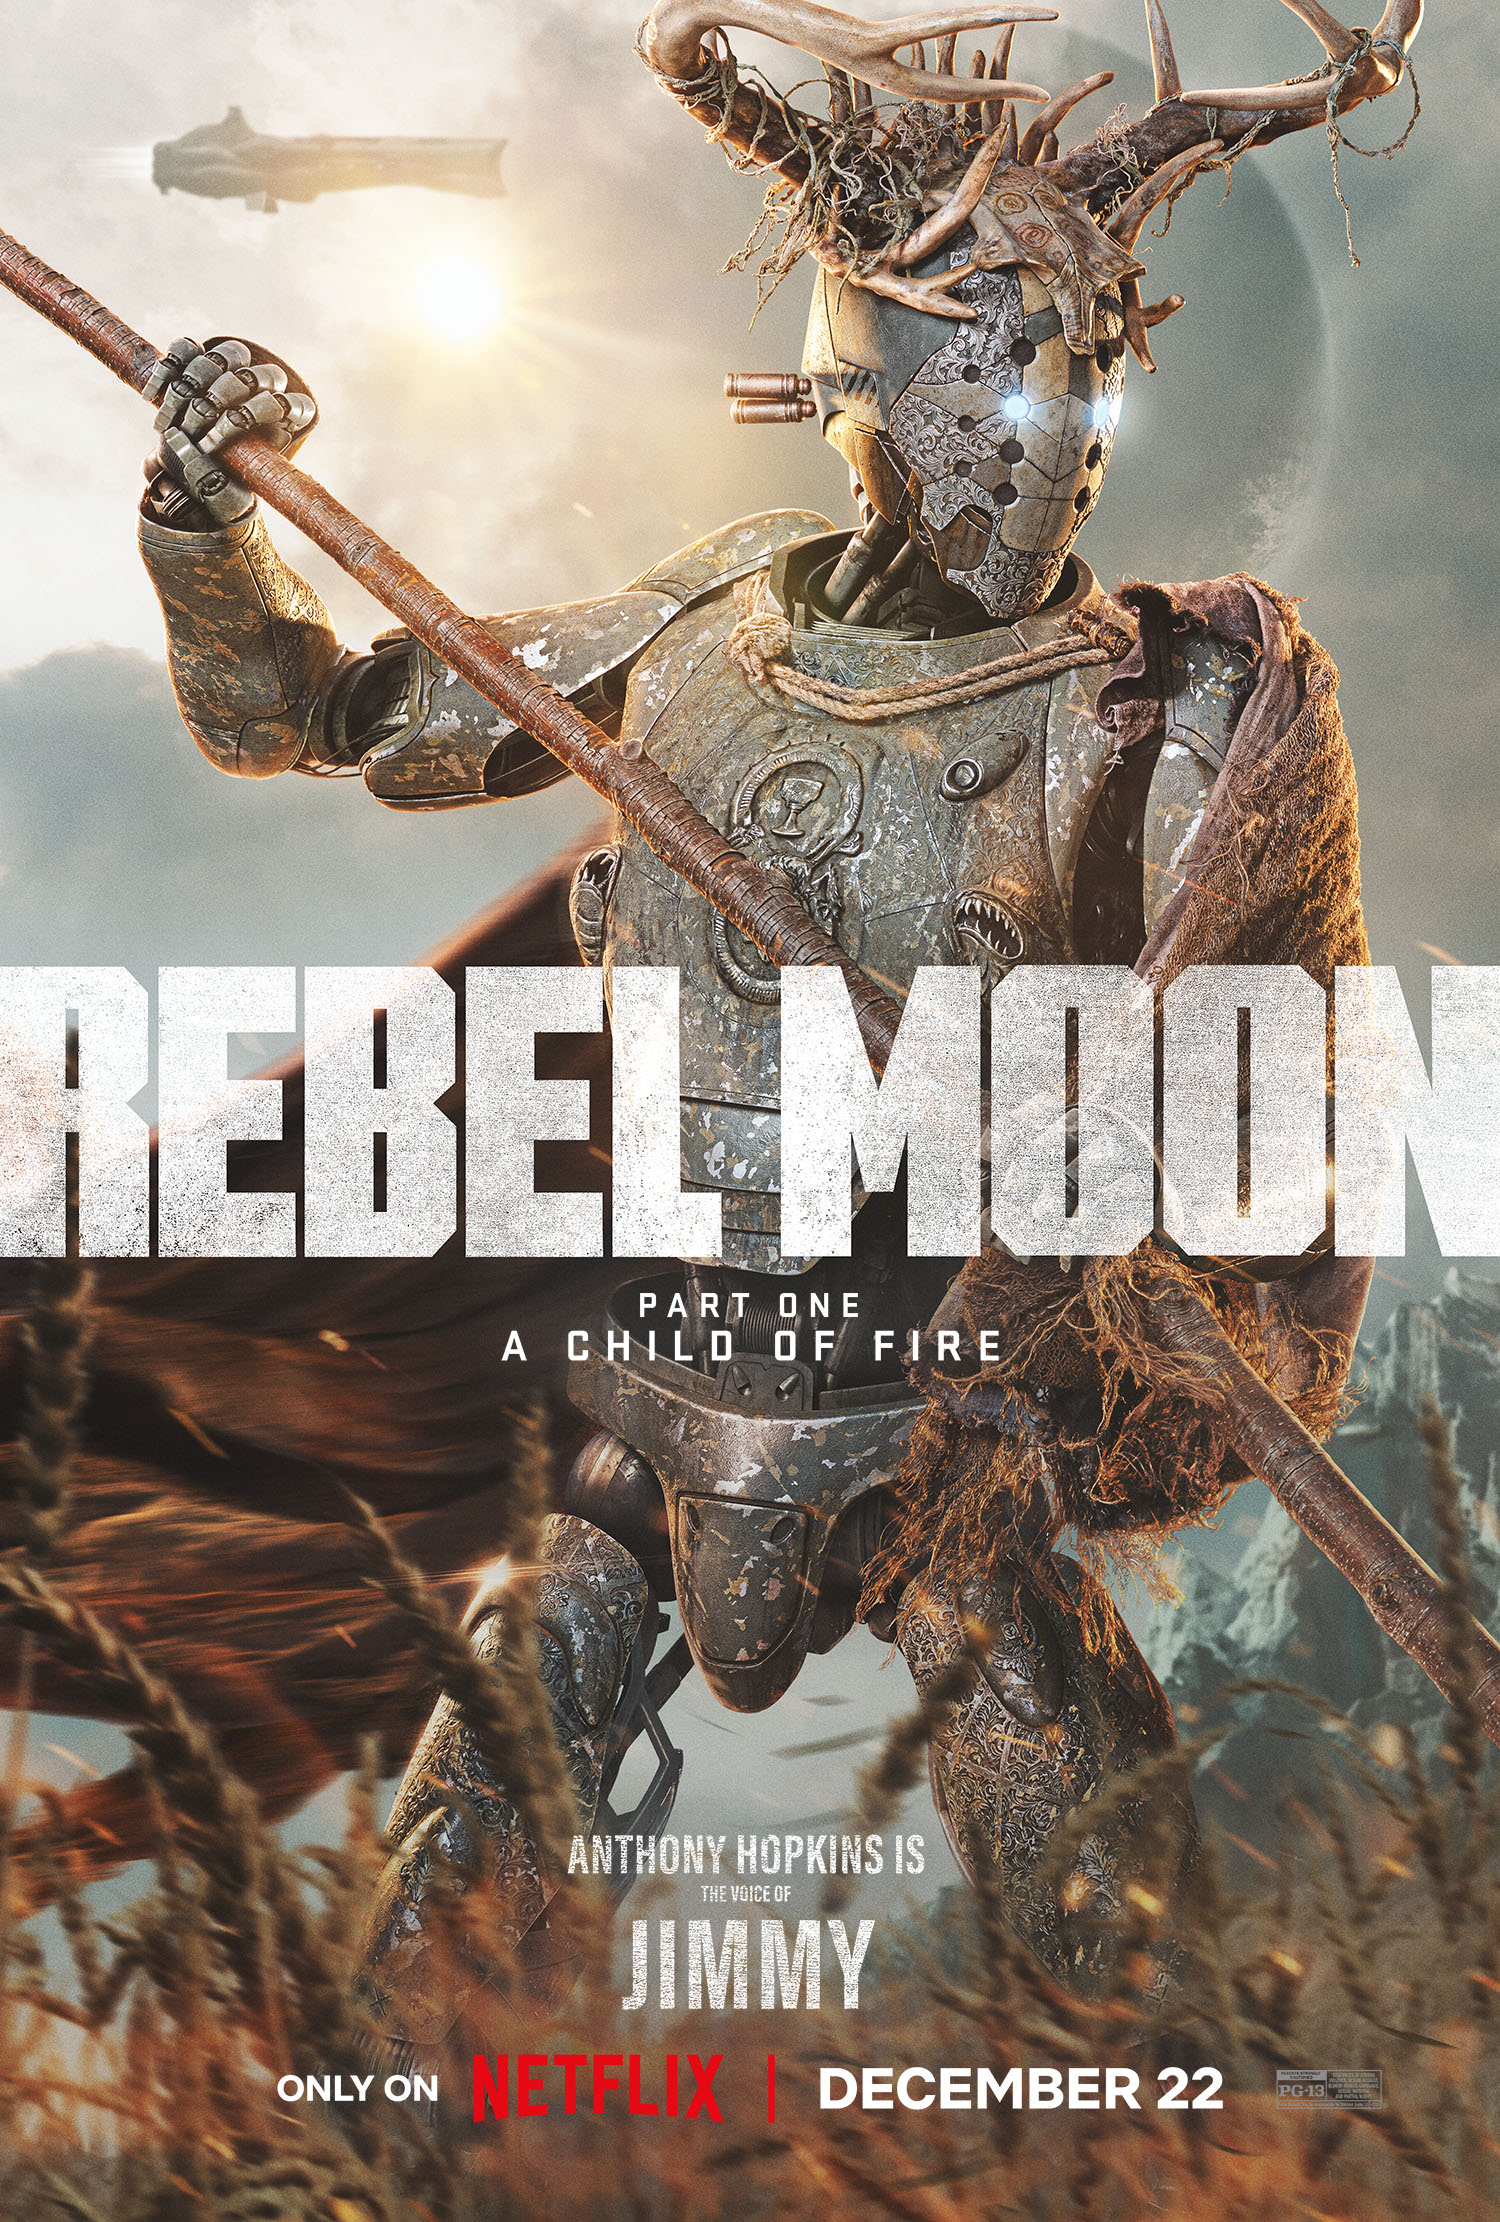 Everyone has something to fight for. Rebel Moon - Part One: A Child of Fire  premieres Dec 22 on Netflix.